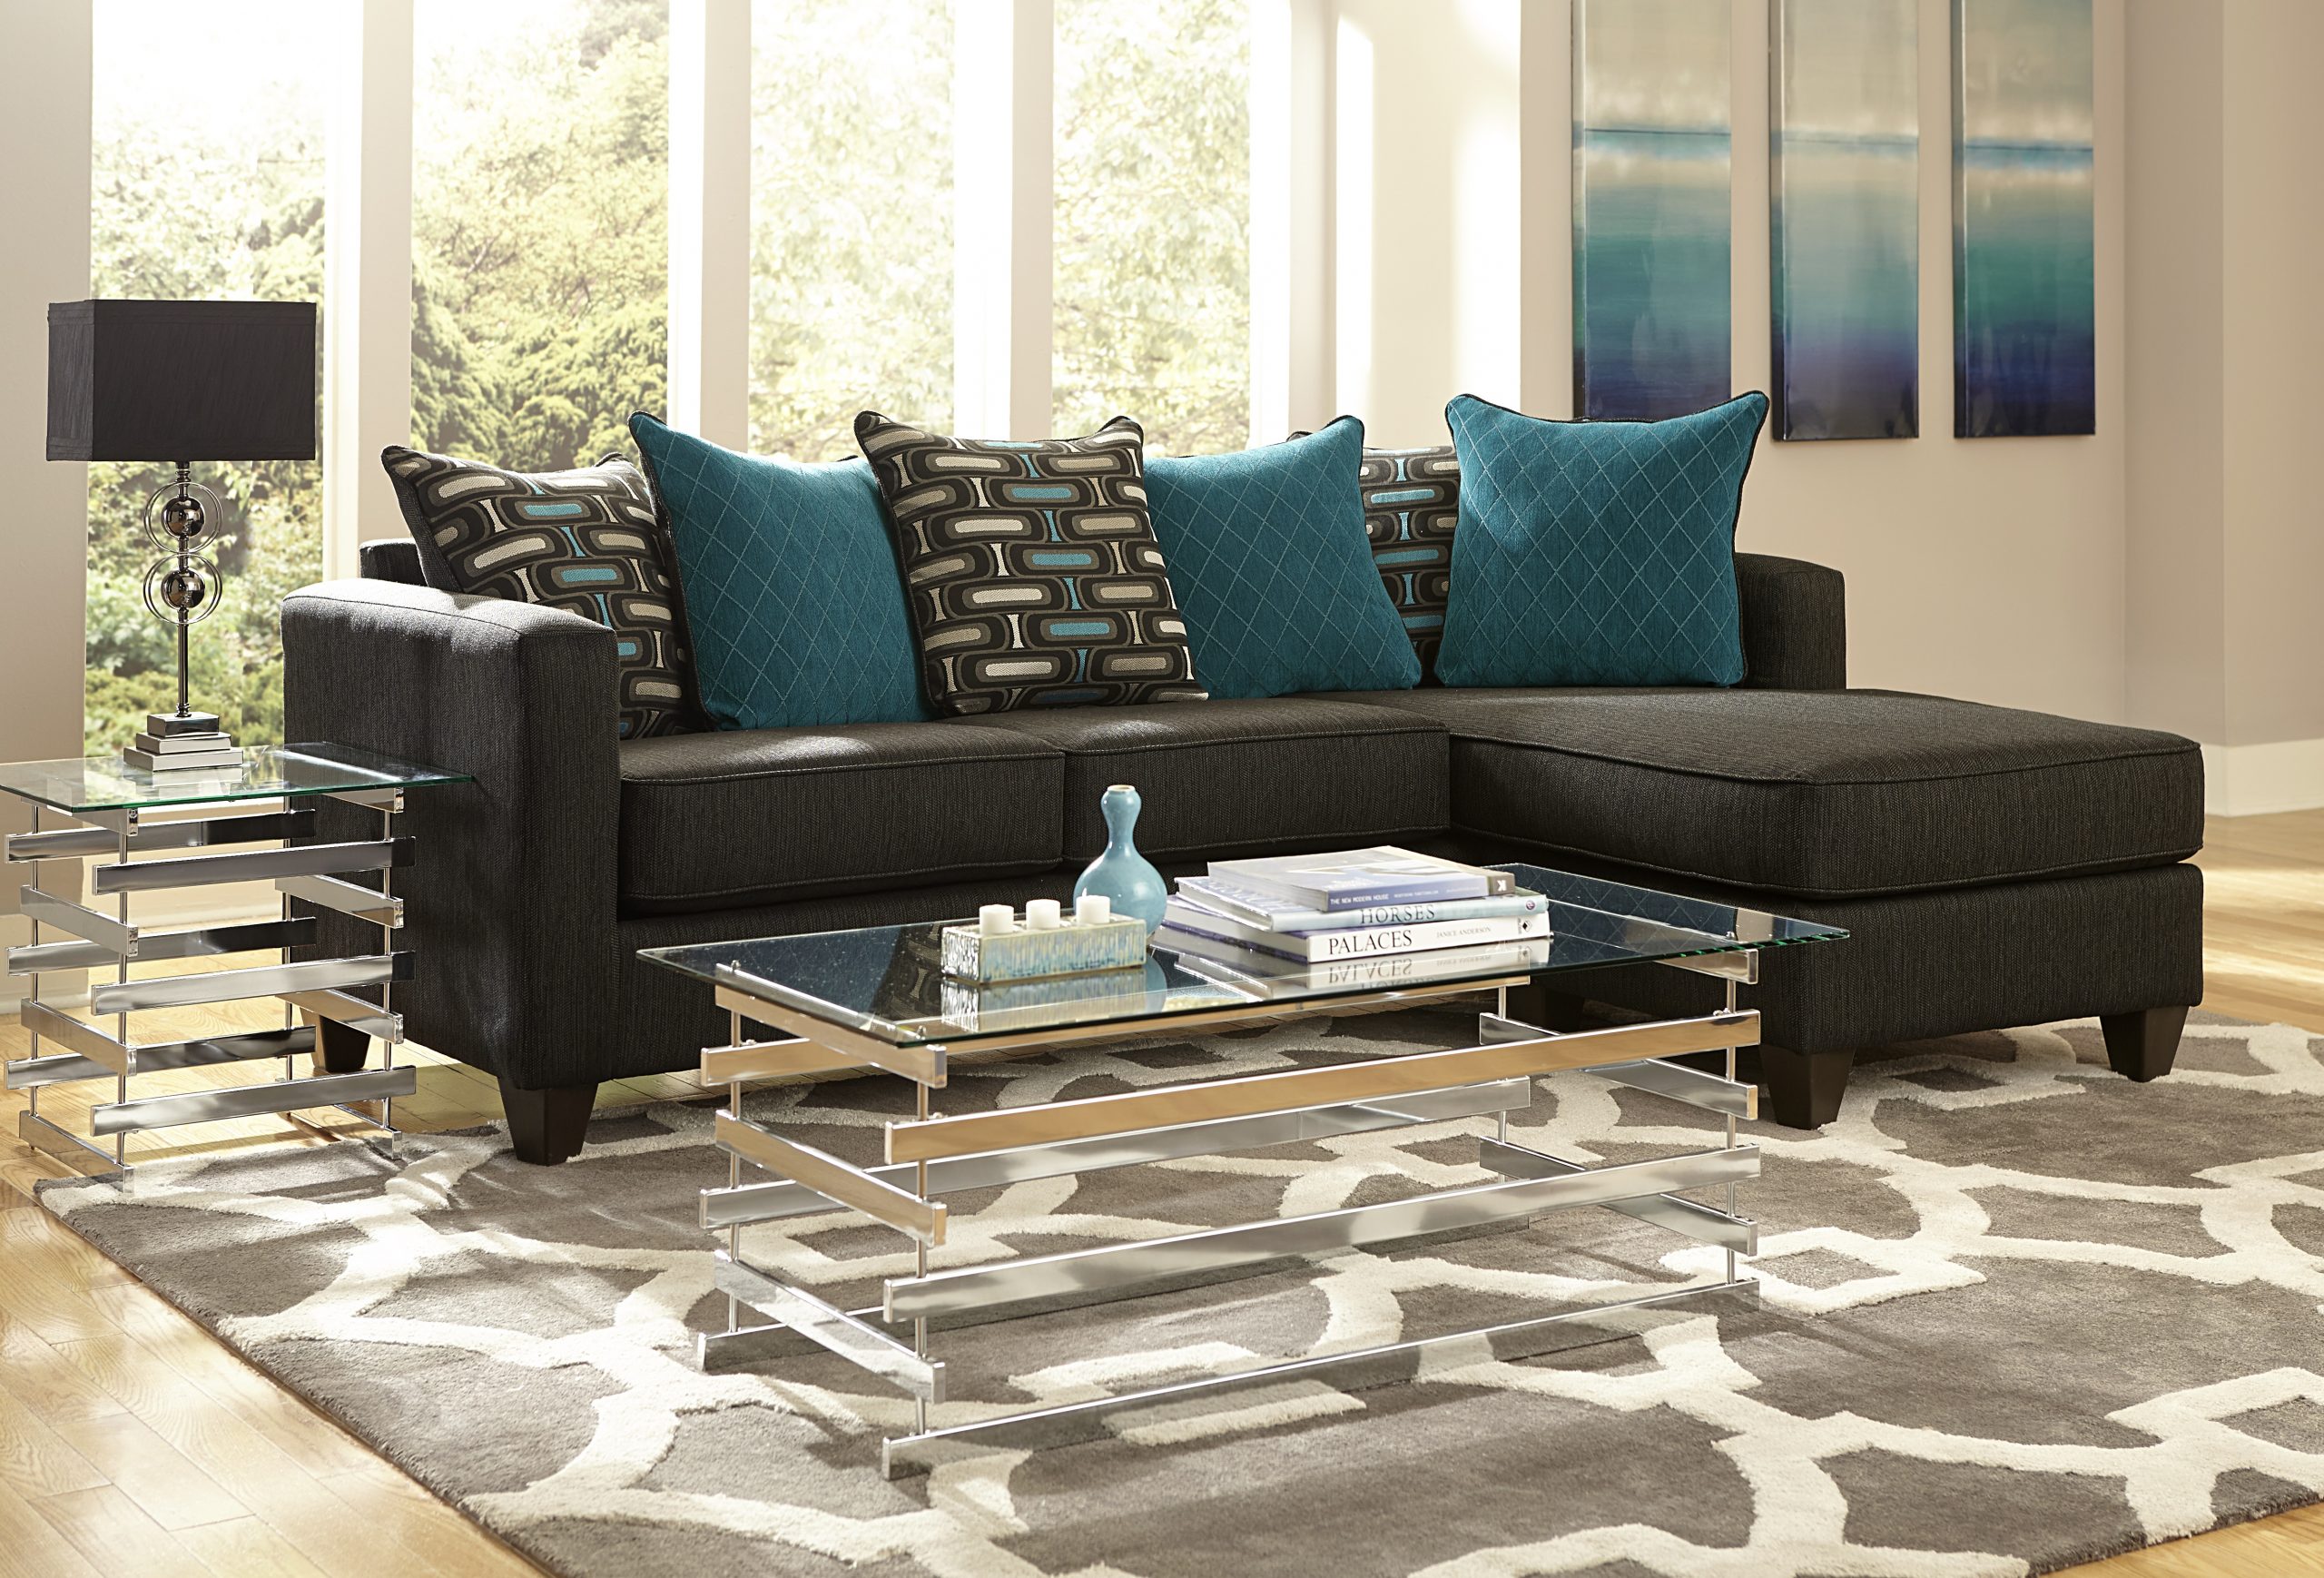 STATIONARY SECTIONAL LIVING ROOM